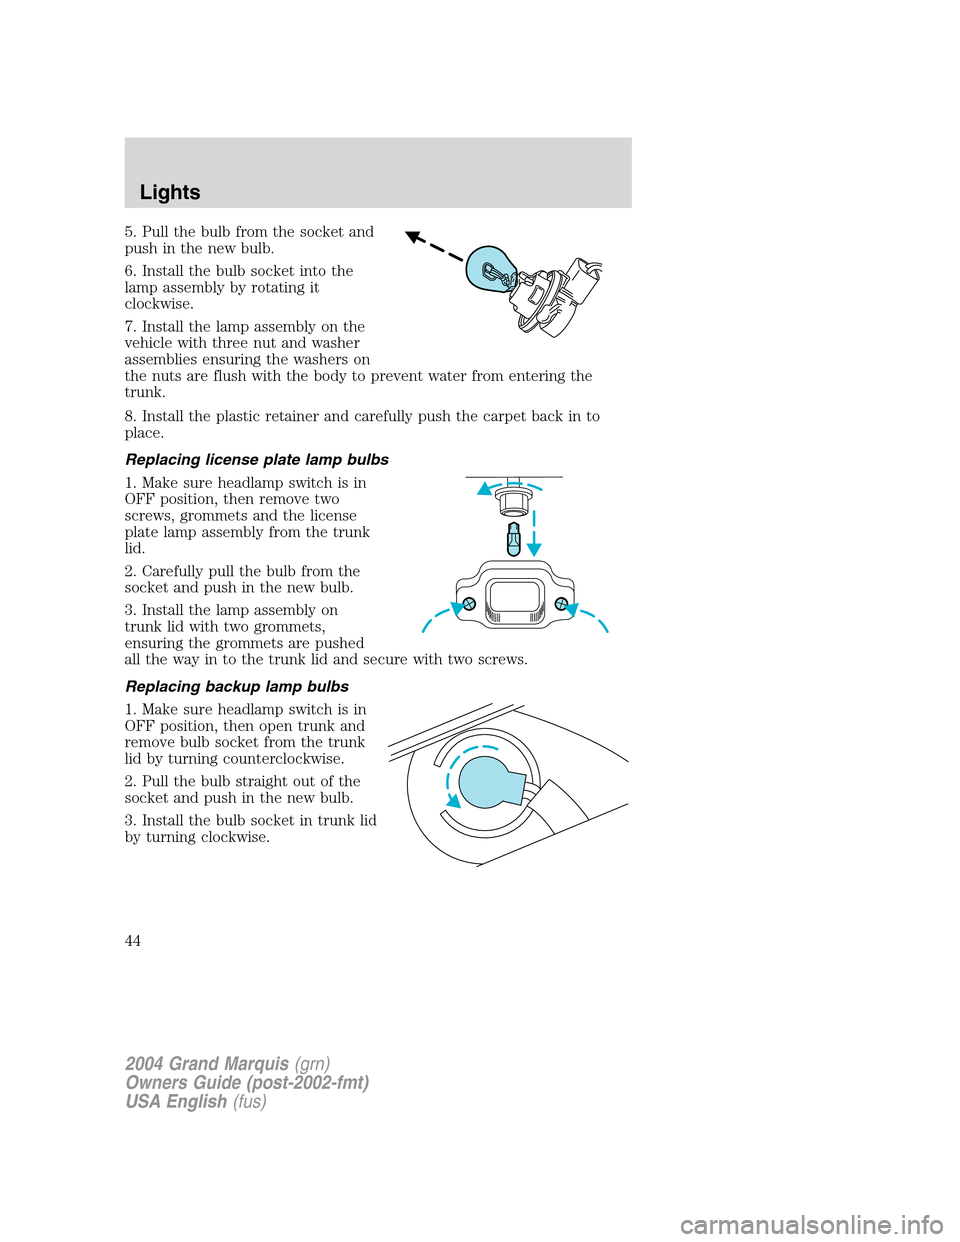 Mercury Grand Marquis 2004  Owners Manuals 5. Pull the bulb from the socket and
push in the new bulb.
6. Install the bulb socket into the
lamp assembly by rotating it
clockwise.
7. Install the lamp assembly on the
vehicle with three nut and wa